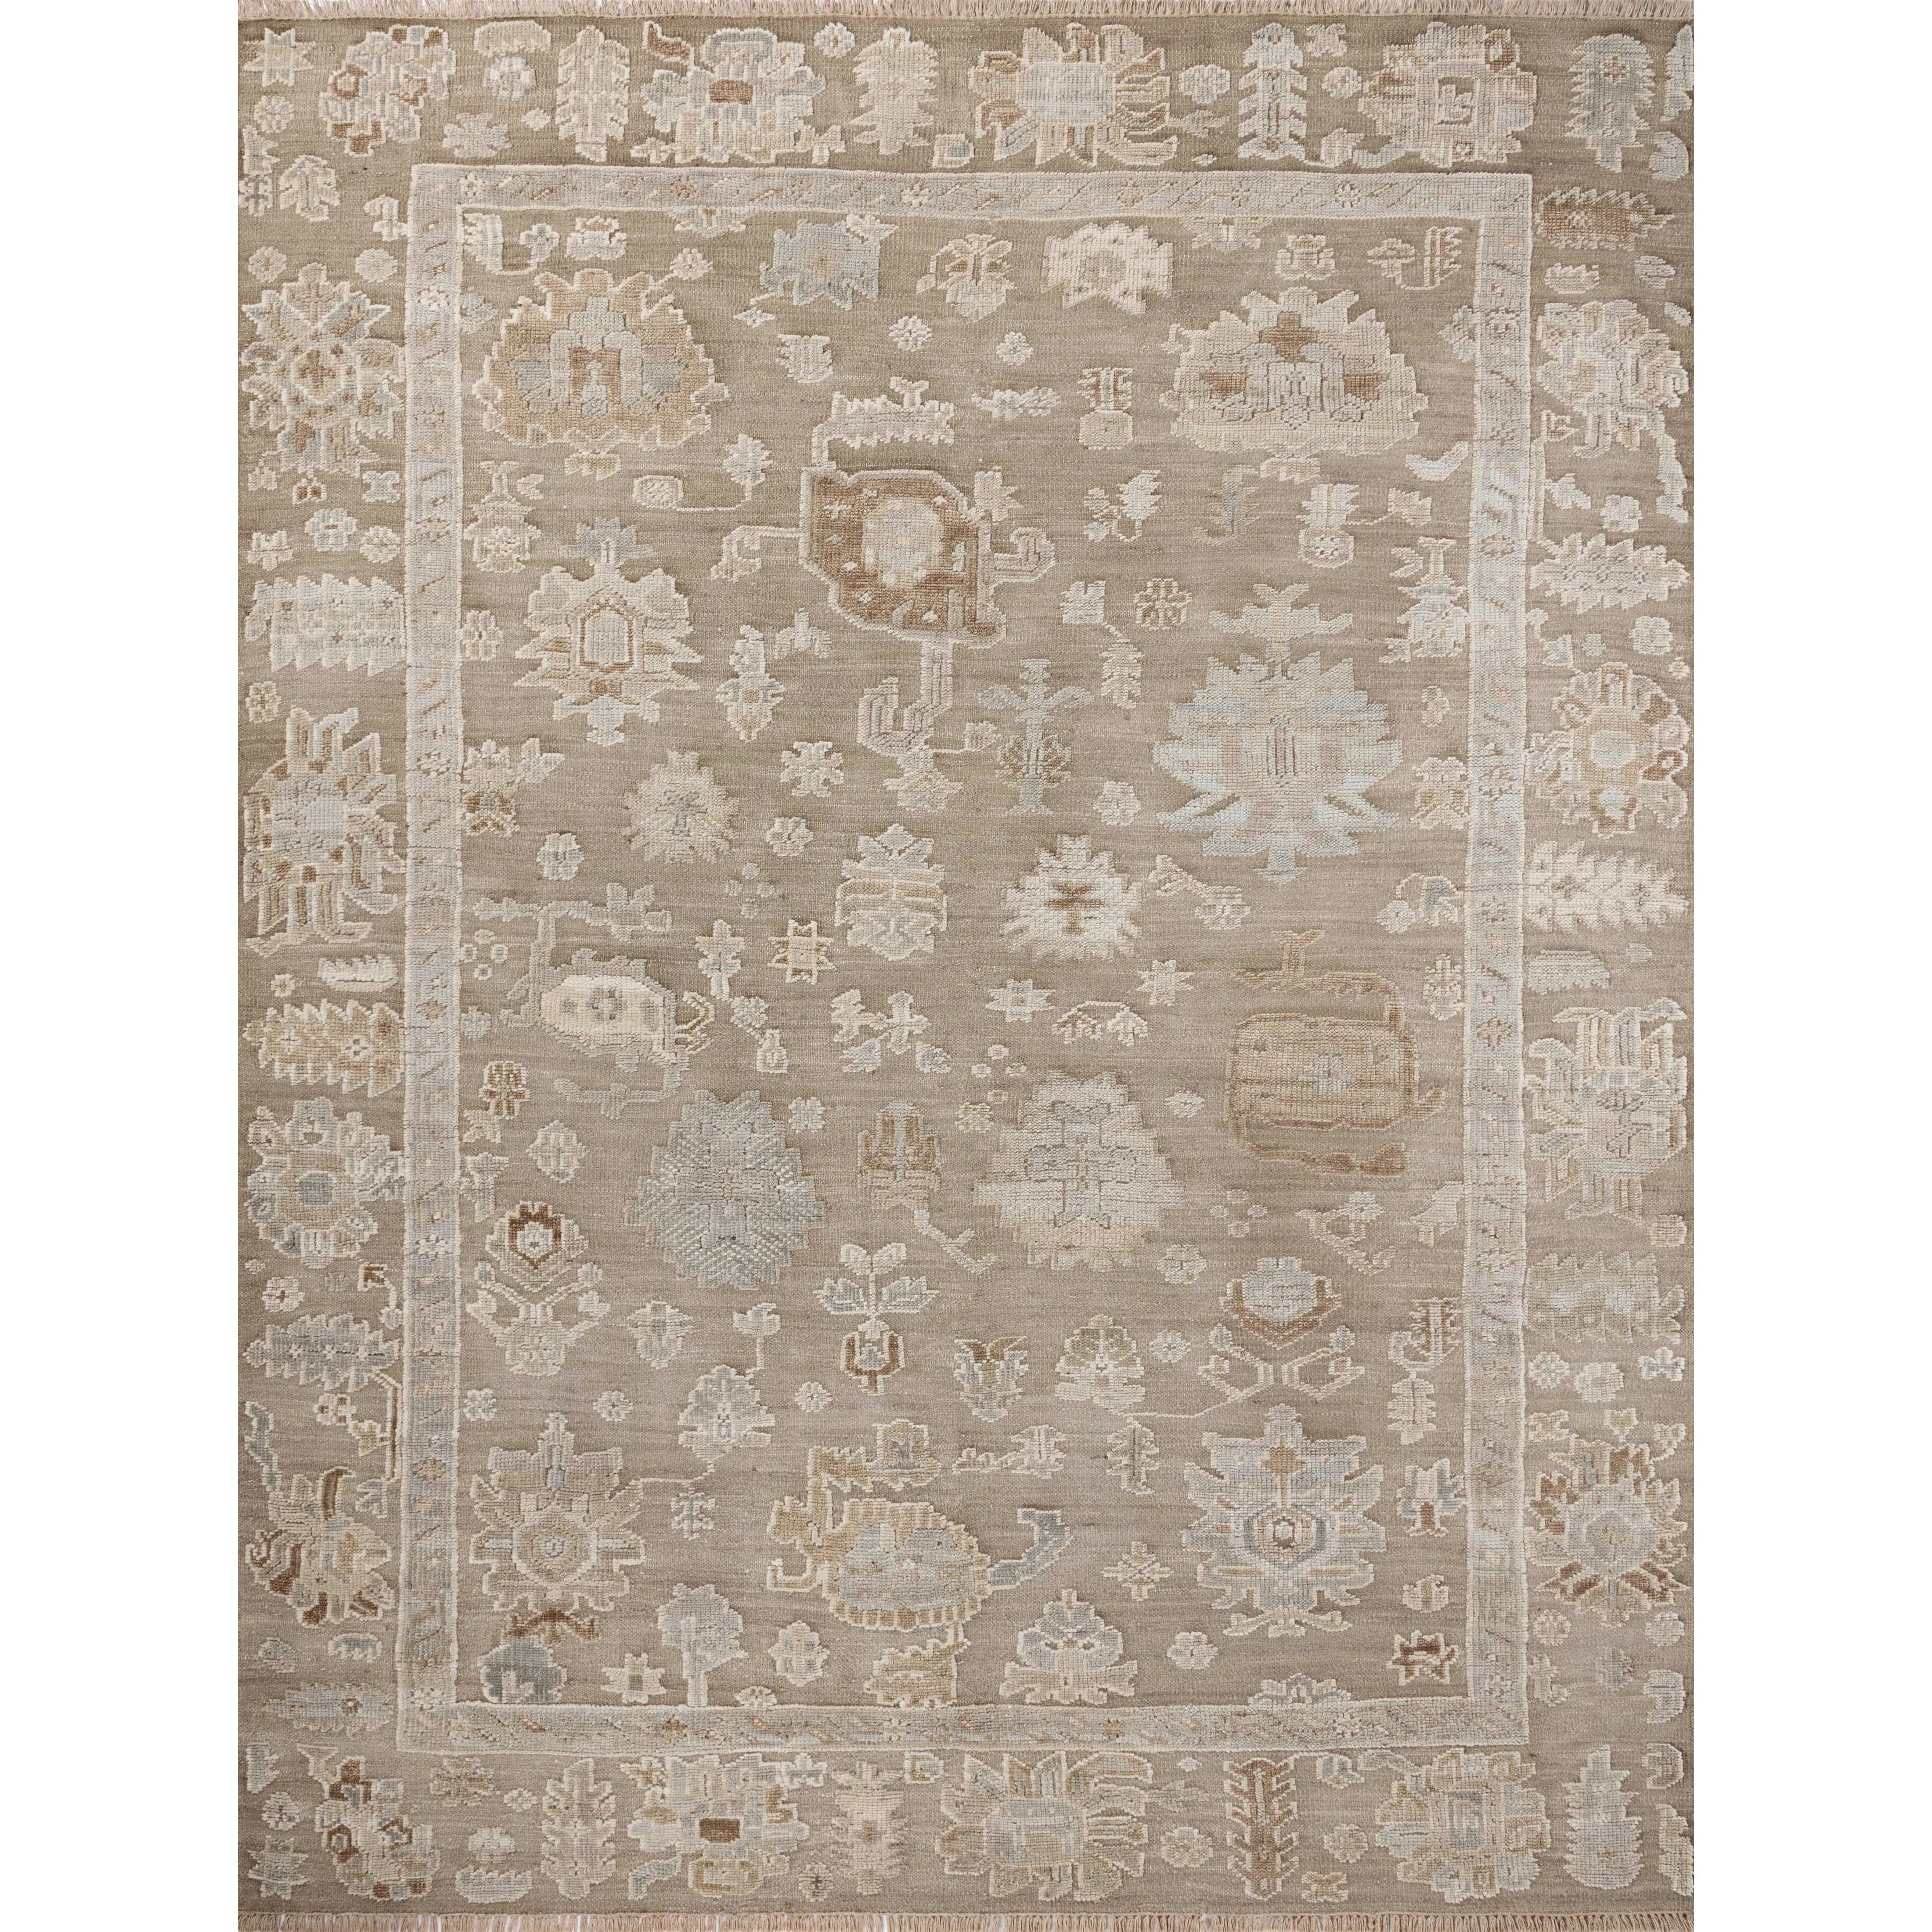 The Marianne Collection is a hand-knotted wool area rug with vintage medallion motifs and short edge fringe, inspired by many one-of-a-kind pieces. The rugâ€™s elegantly neutral palette feels modern, while the rugâ€™s overall aesthetic is timeless. Amethyst Home provides interior design, new home construction design consulting, vintage area rugs, and lighting in the Miami metro area.